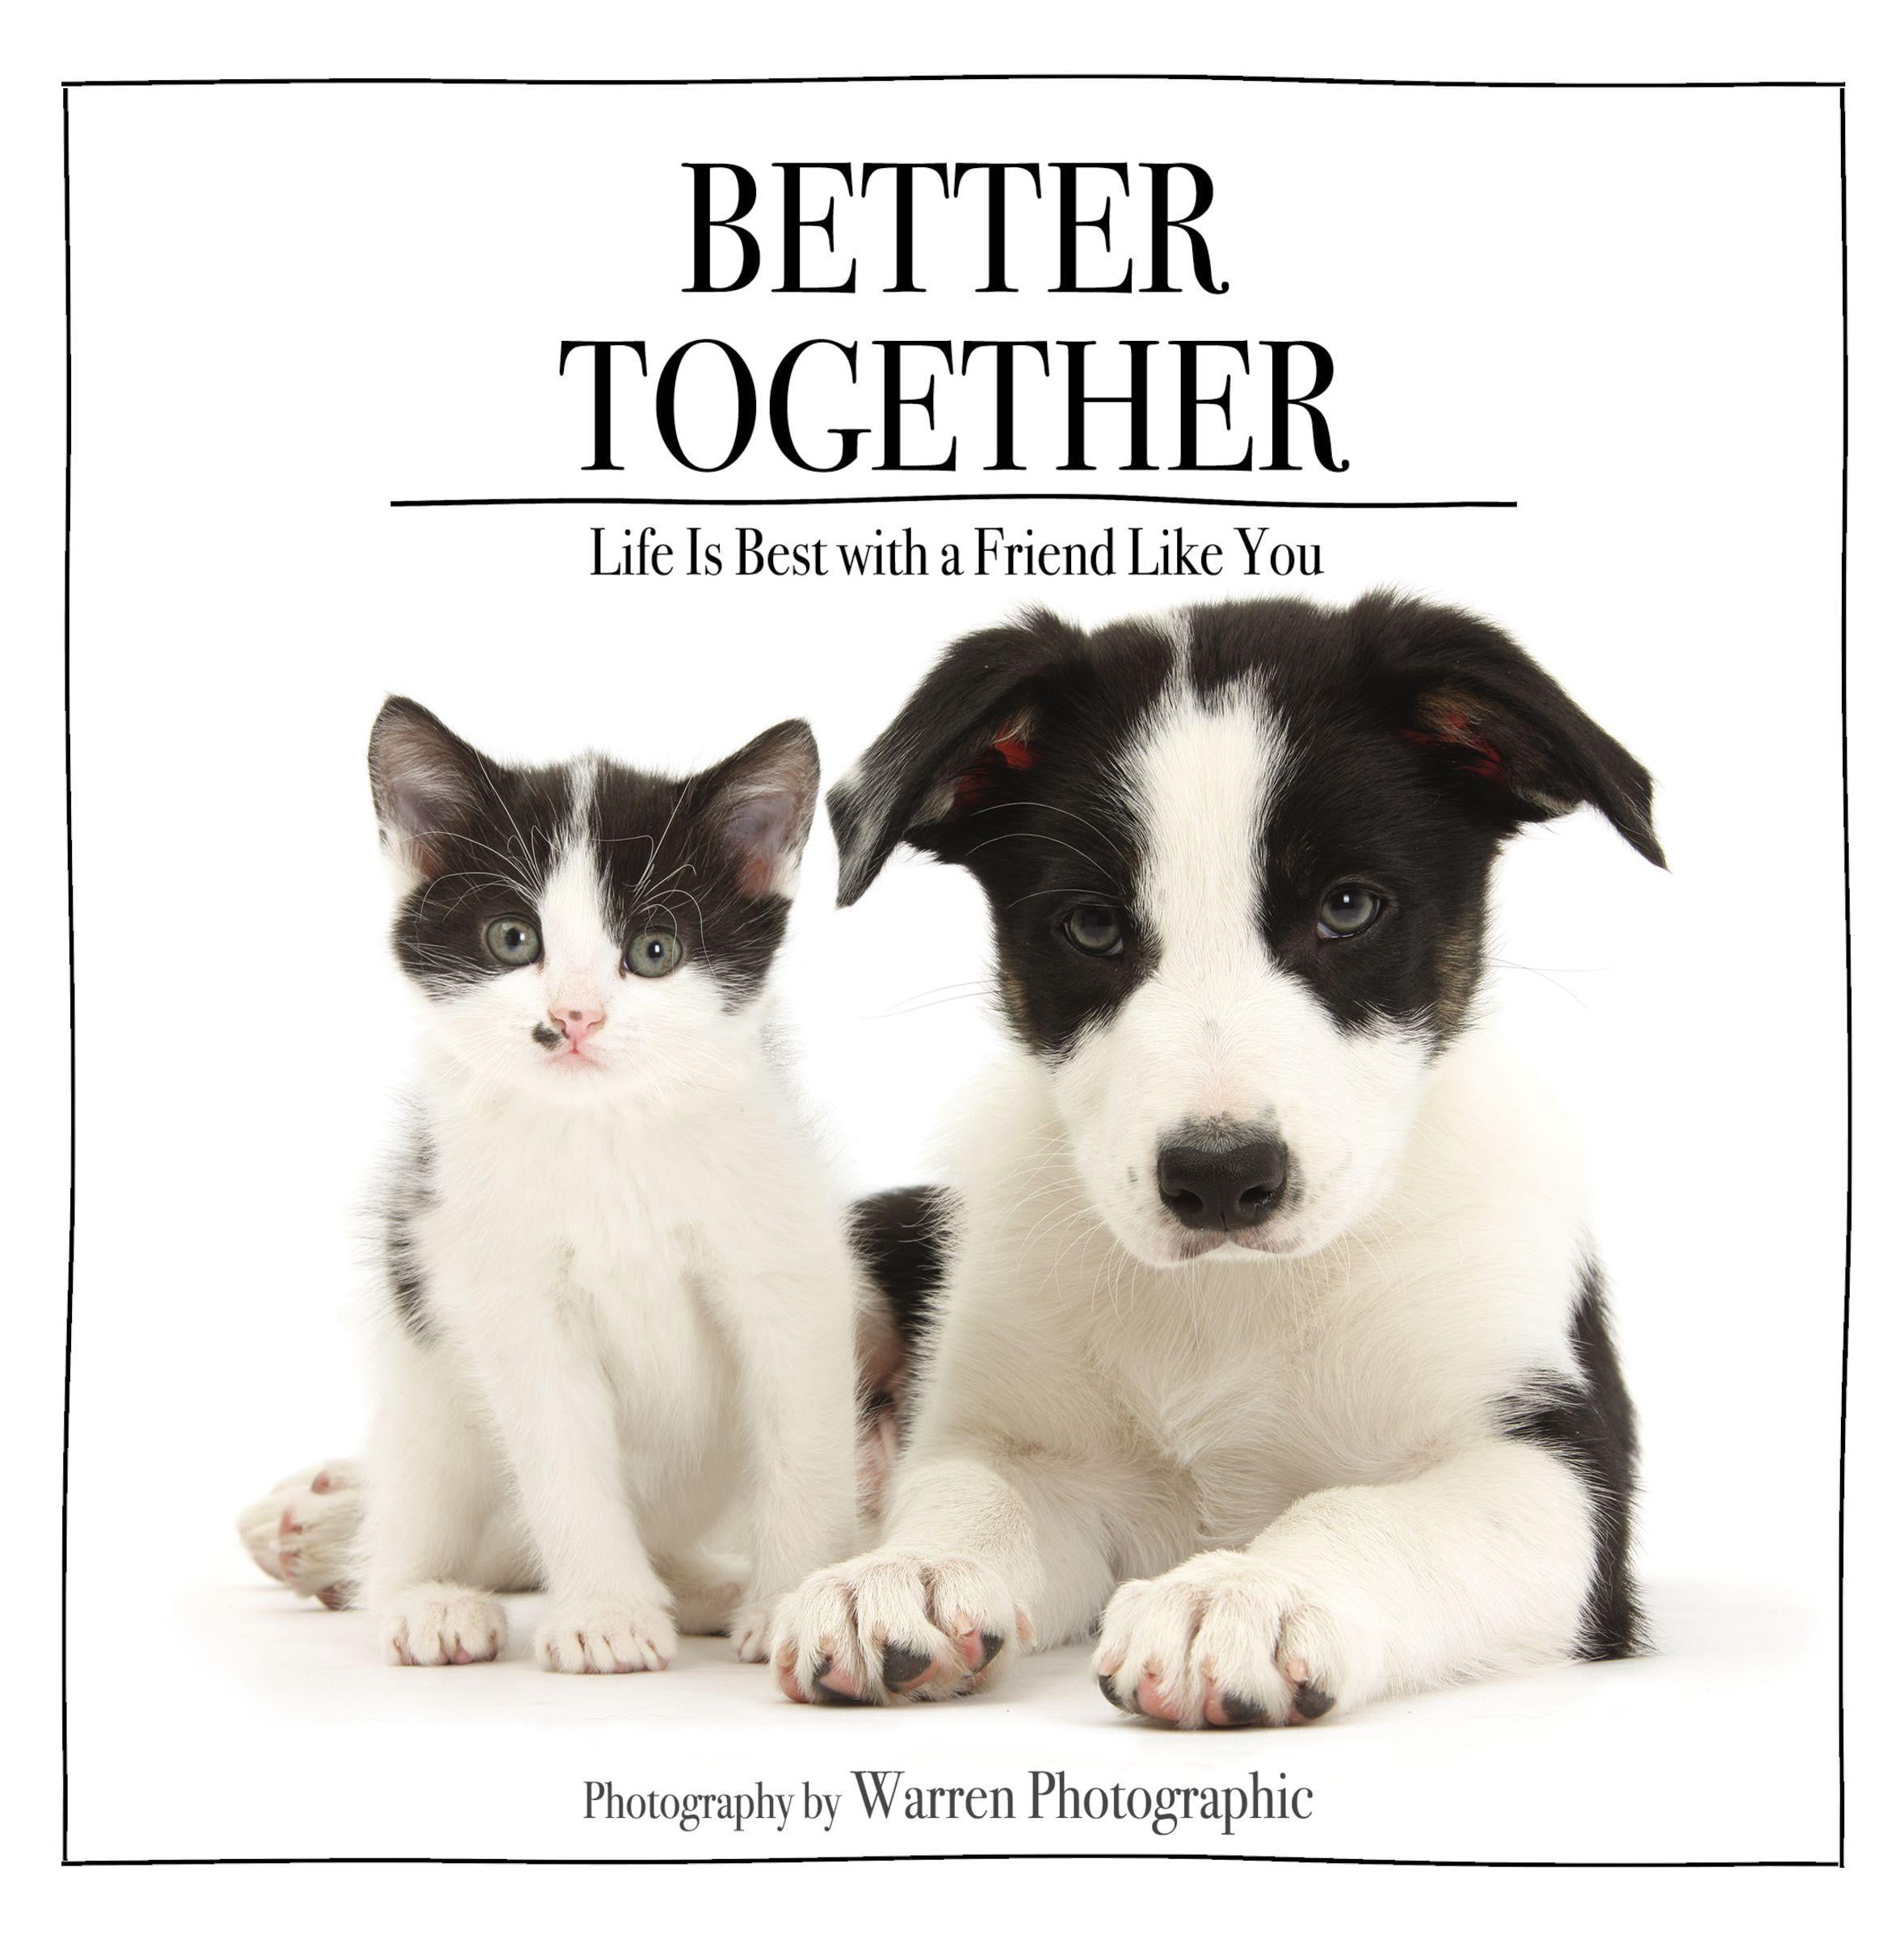 A friend like you. Life is better with you. Better together. Better together перевод.